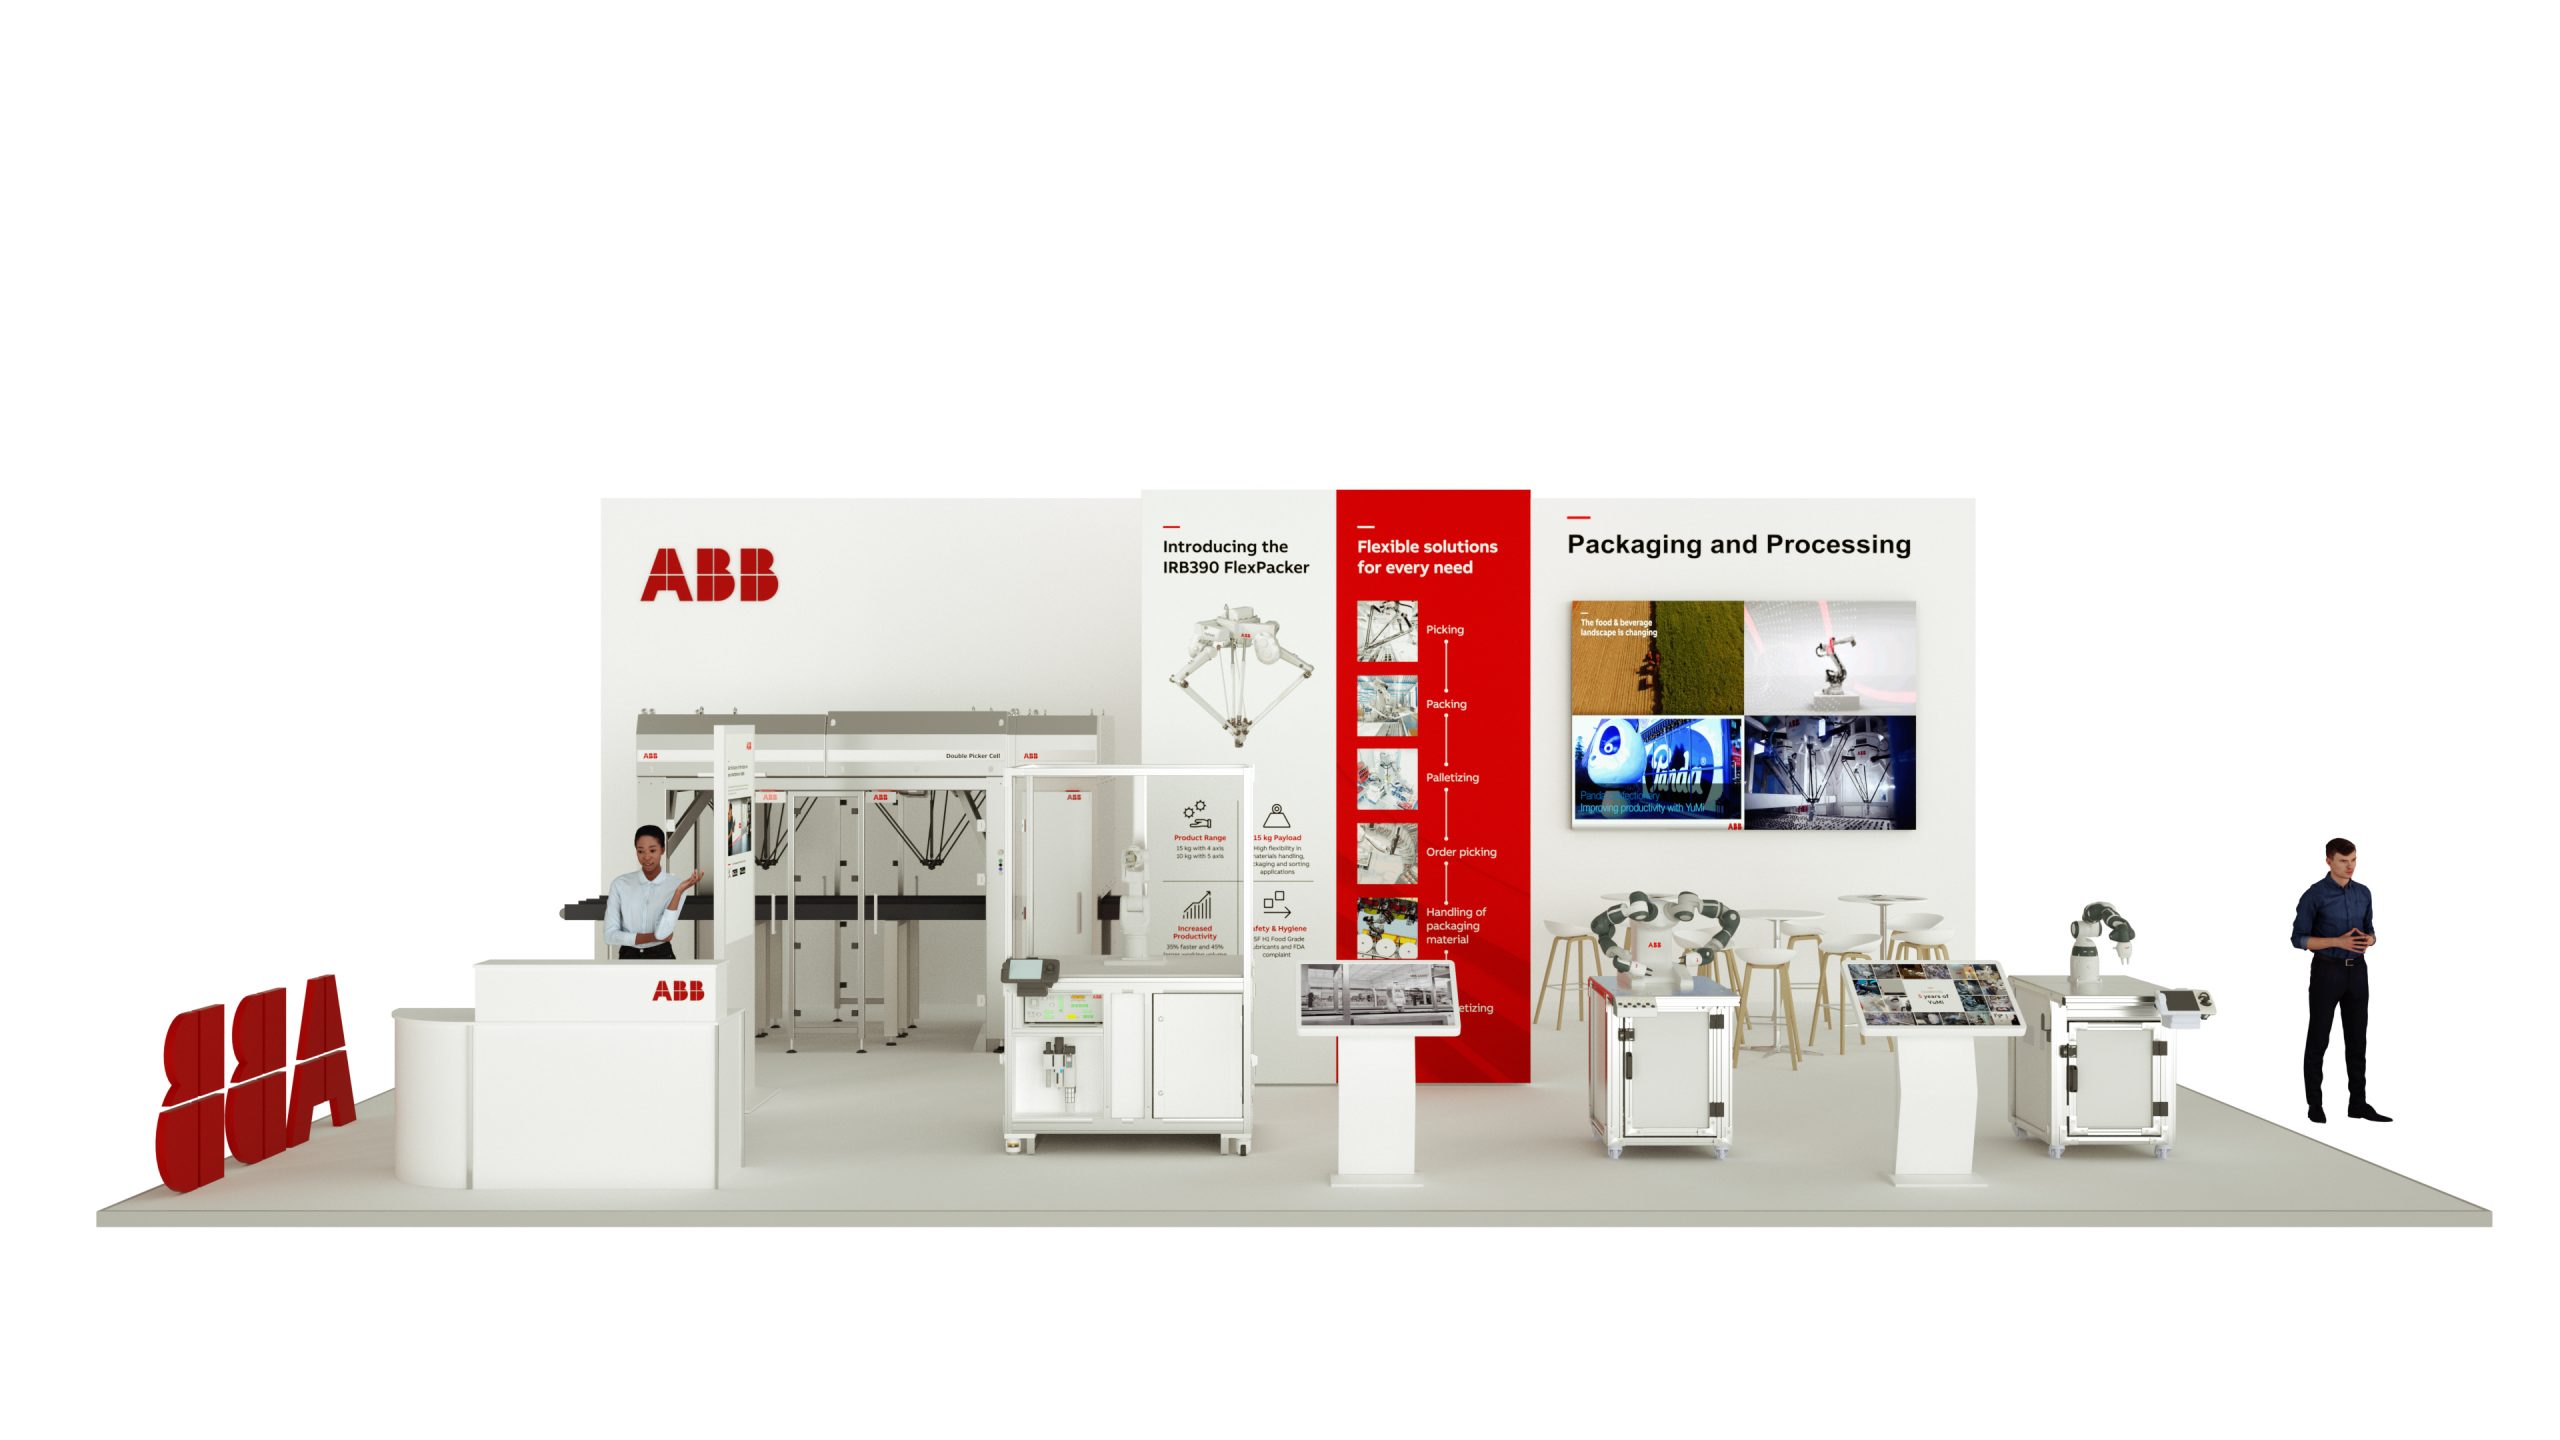 ABB processing and packaging robots showcased in virtual exhibition stand